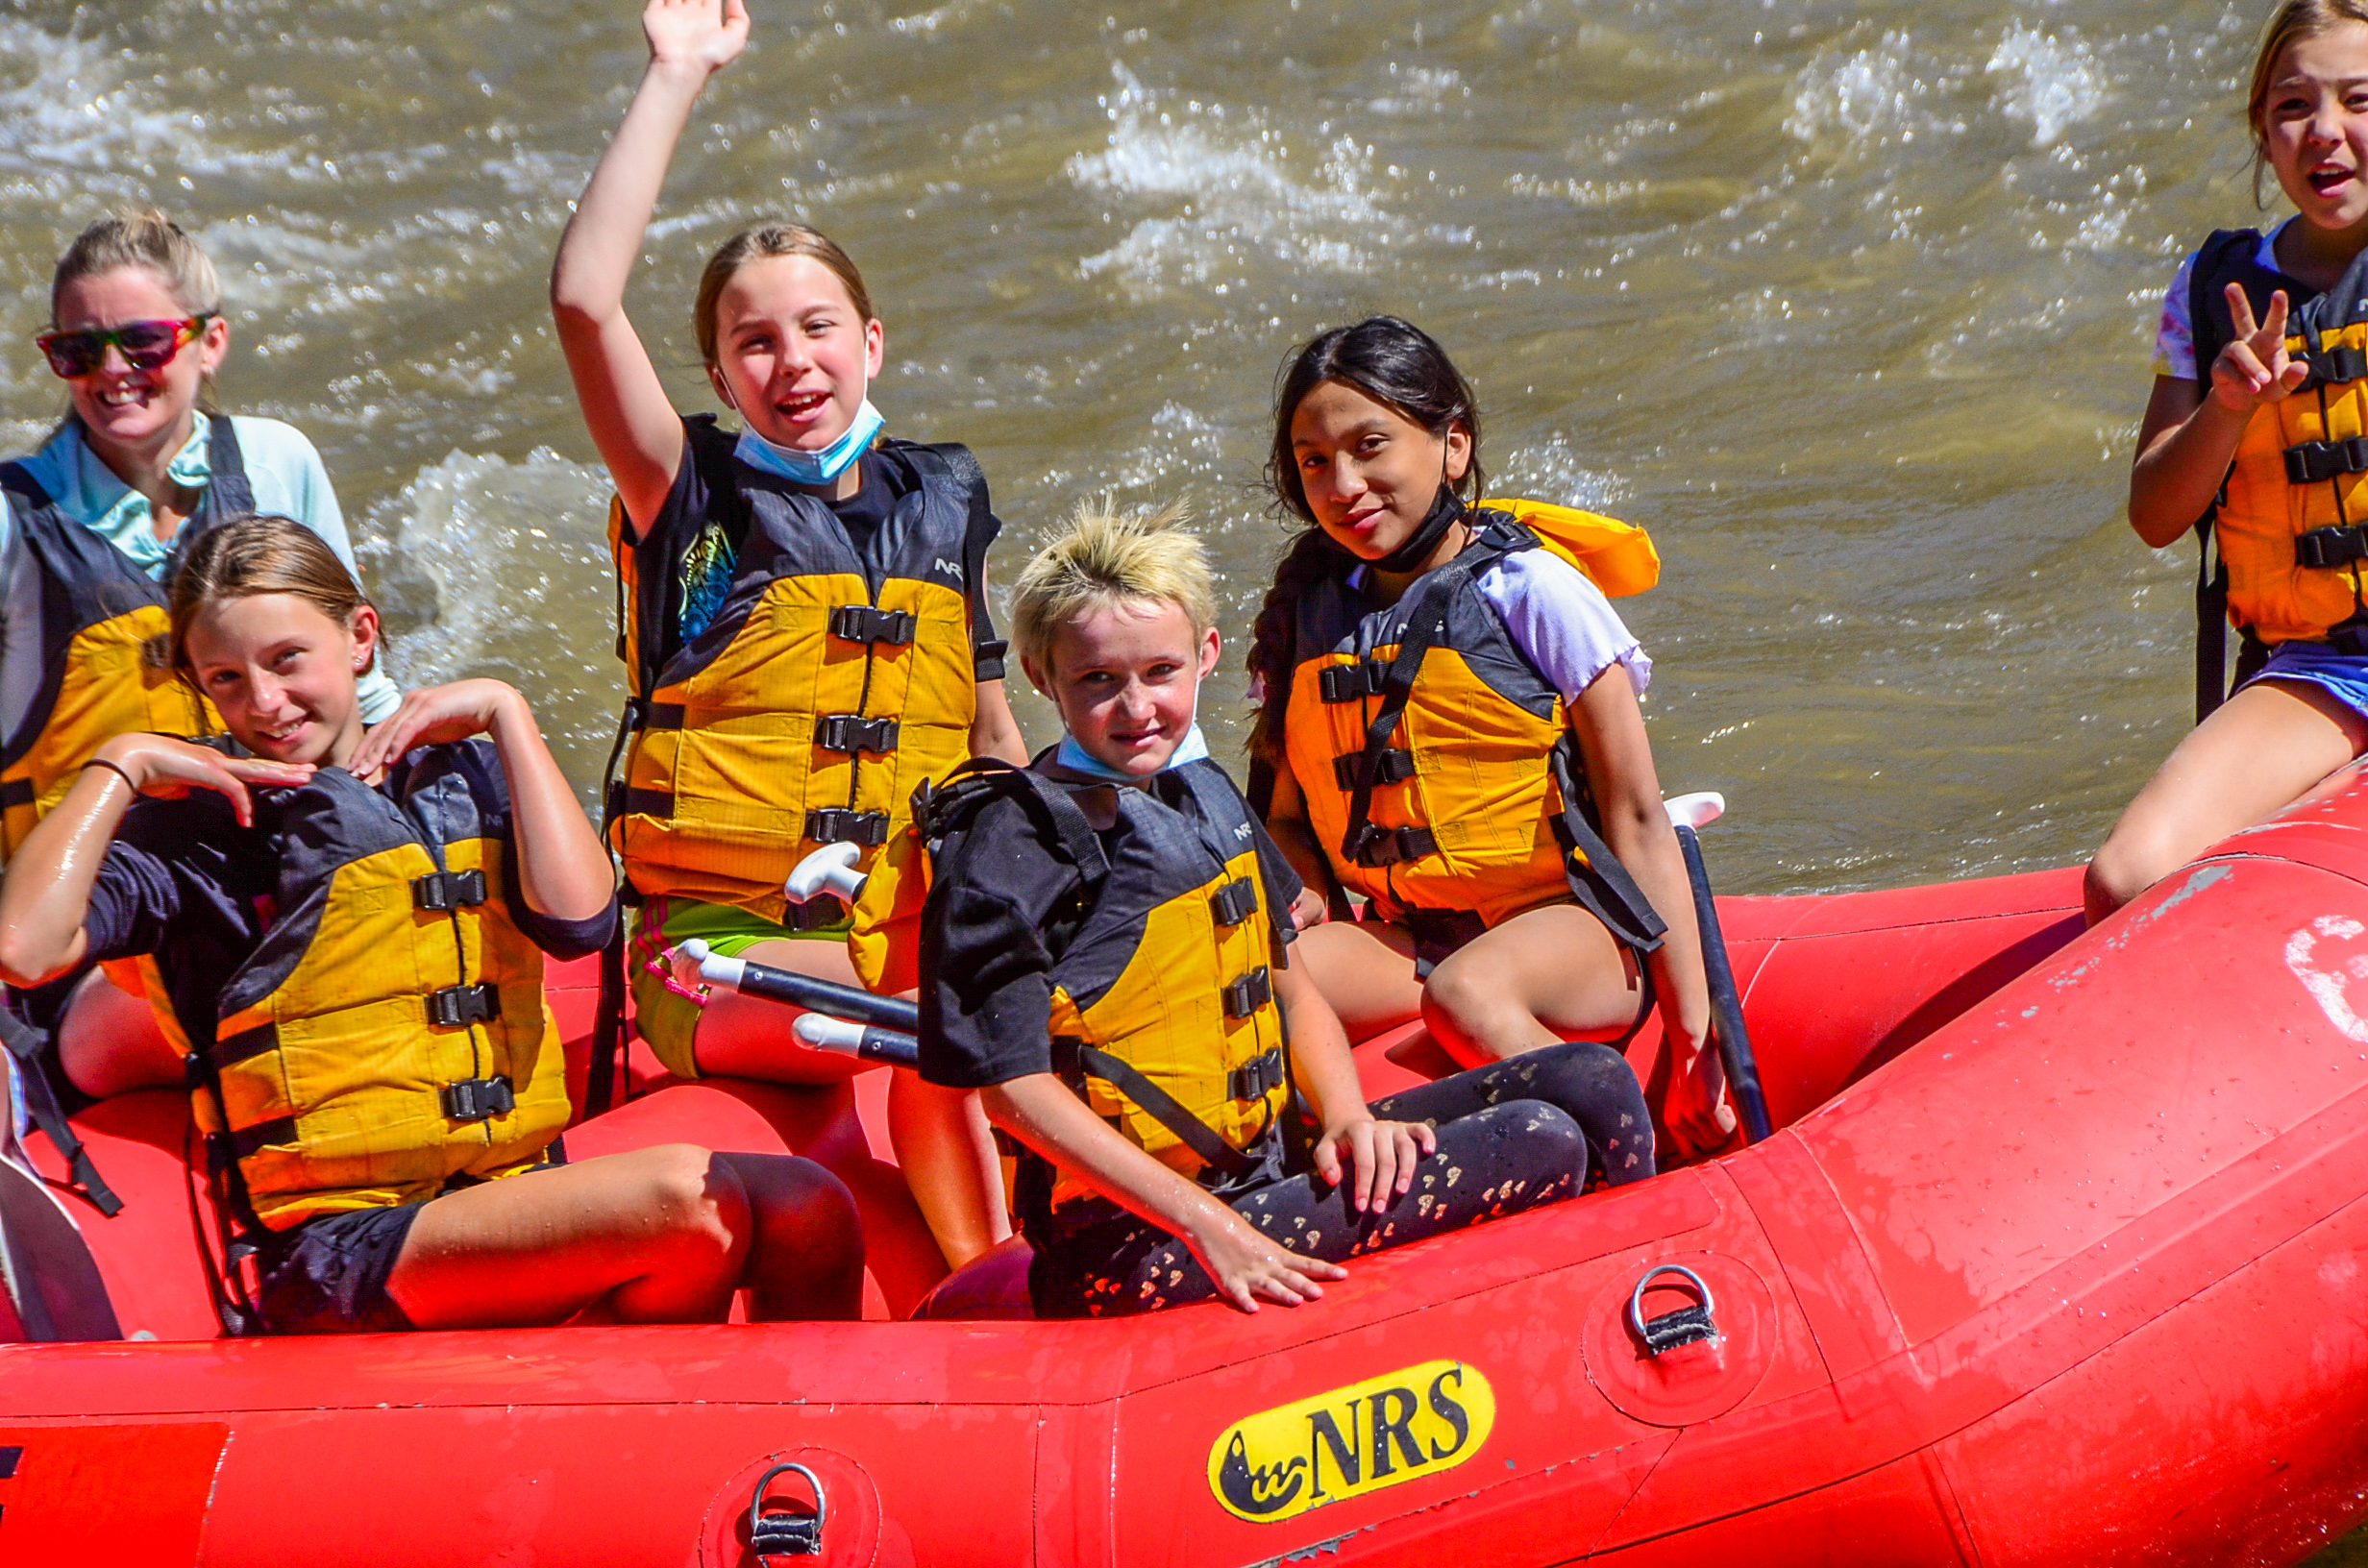 a scouting group rafting the Colorado river